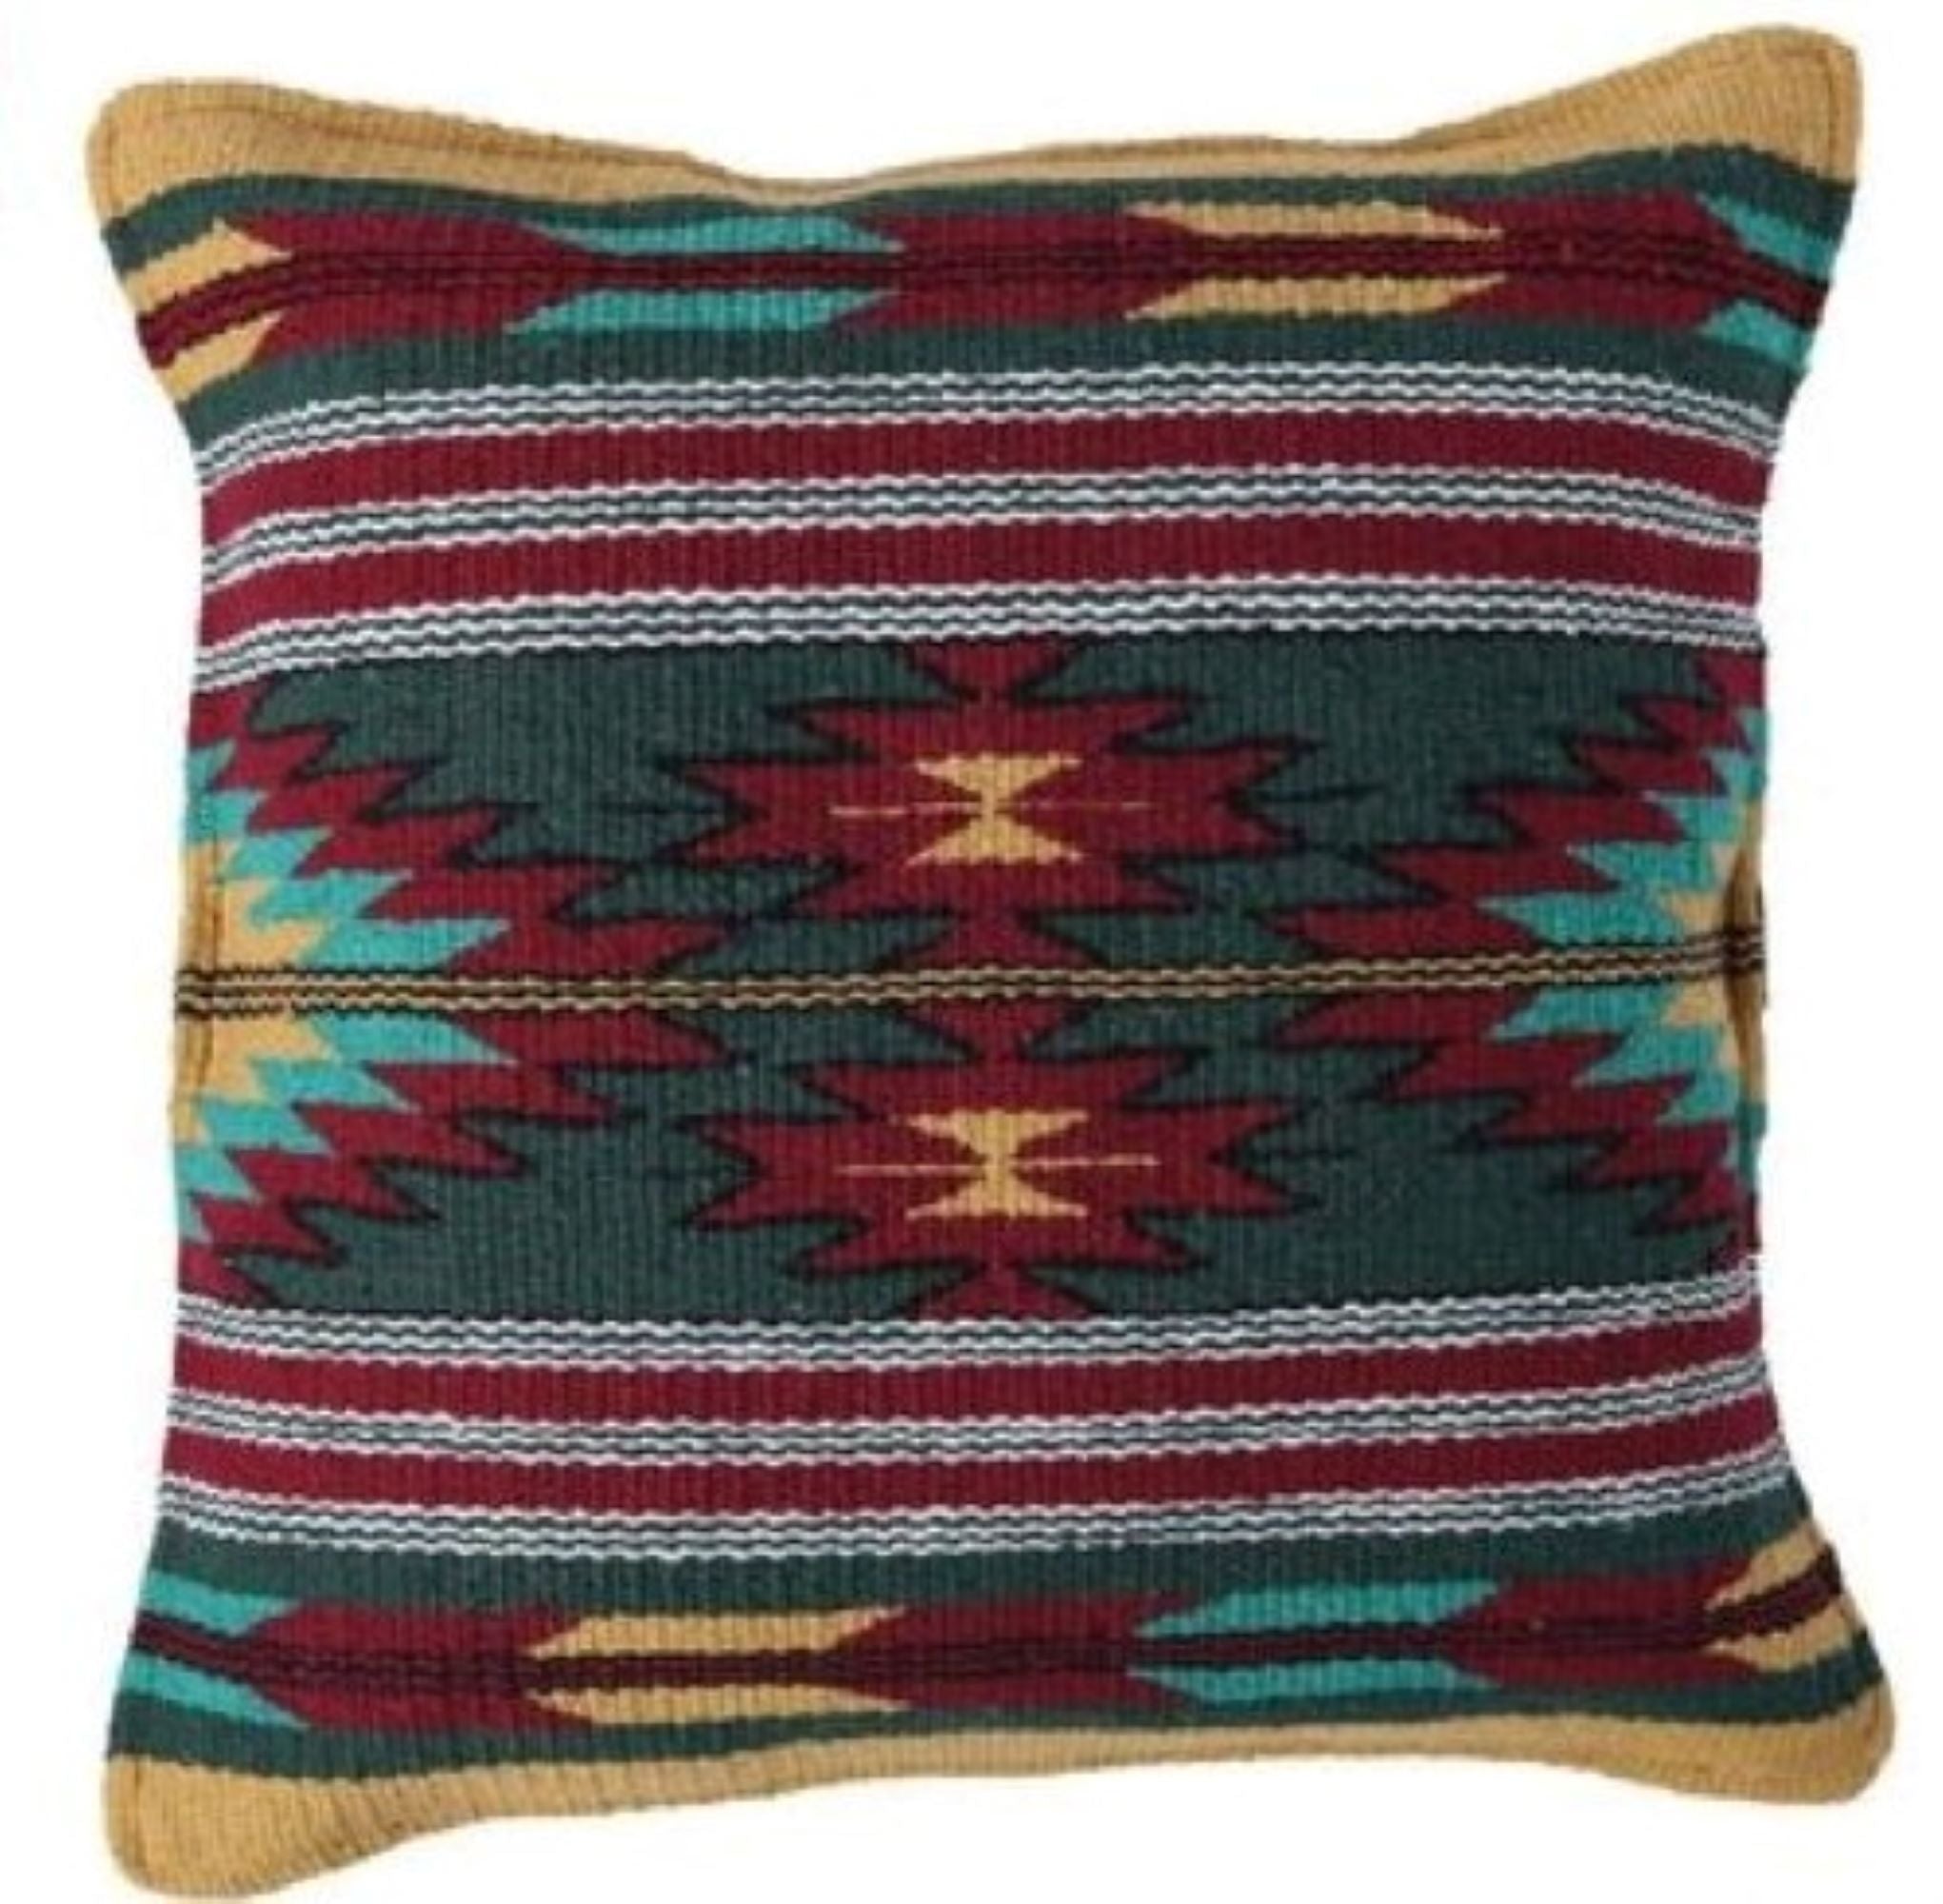 Southwestern Handwoven Aztec Pillow Covers- Assorted Colors- 18 X 18 Throw Pillow - Ranch Junkie Mercantile LLC